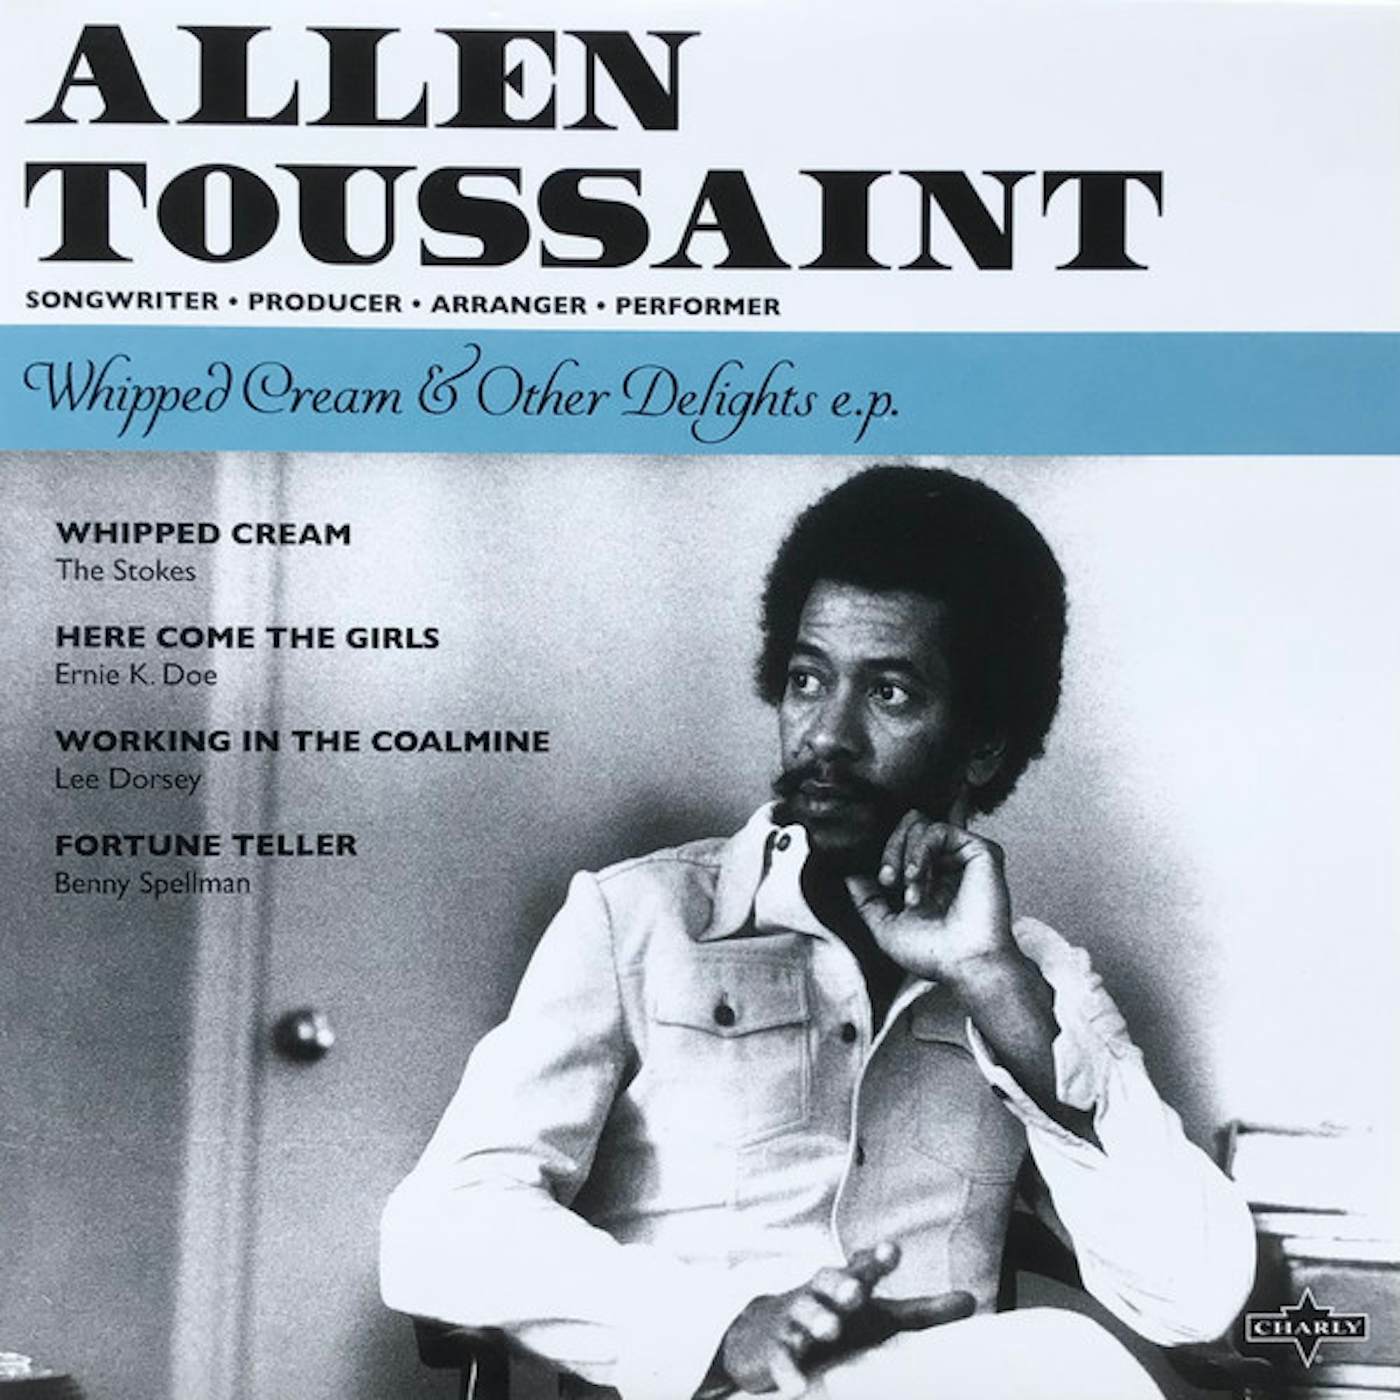 Allen Toussaint Whipped Cream & Other Delights (7 ) vinyl record